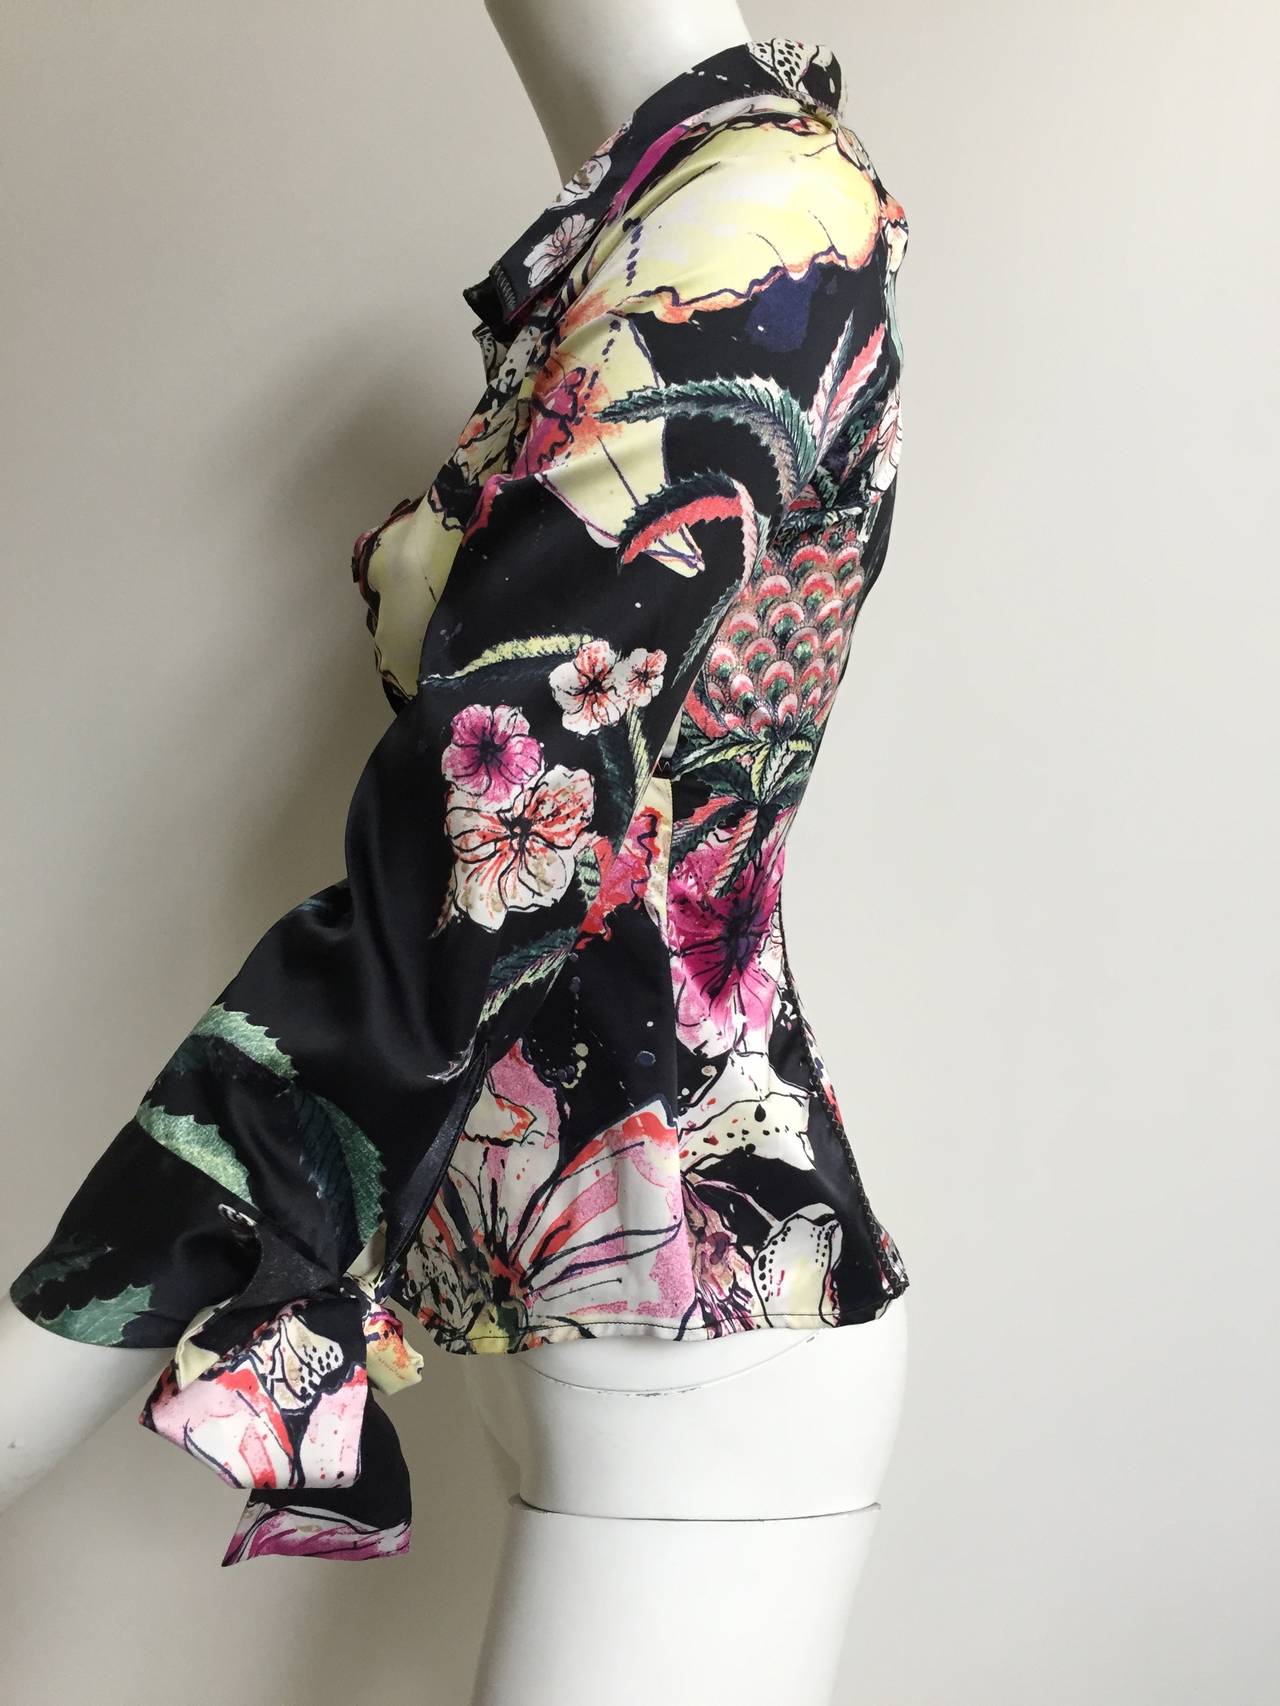 Just Cavalli by Roberto Cavalli floral pattern stretch fabric blouse with bow tie sleeve cuffs is a small size. The mannequin is a true size 4 and it fits but snuggly. 
Measurements are:
32" bust
27" waist
20" sleeve